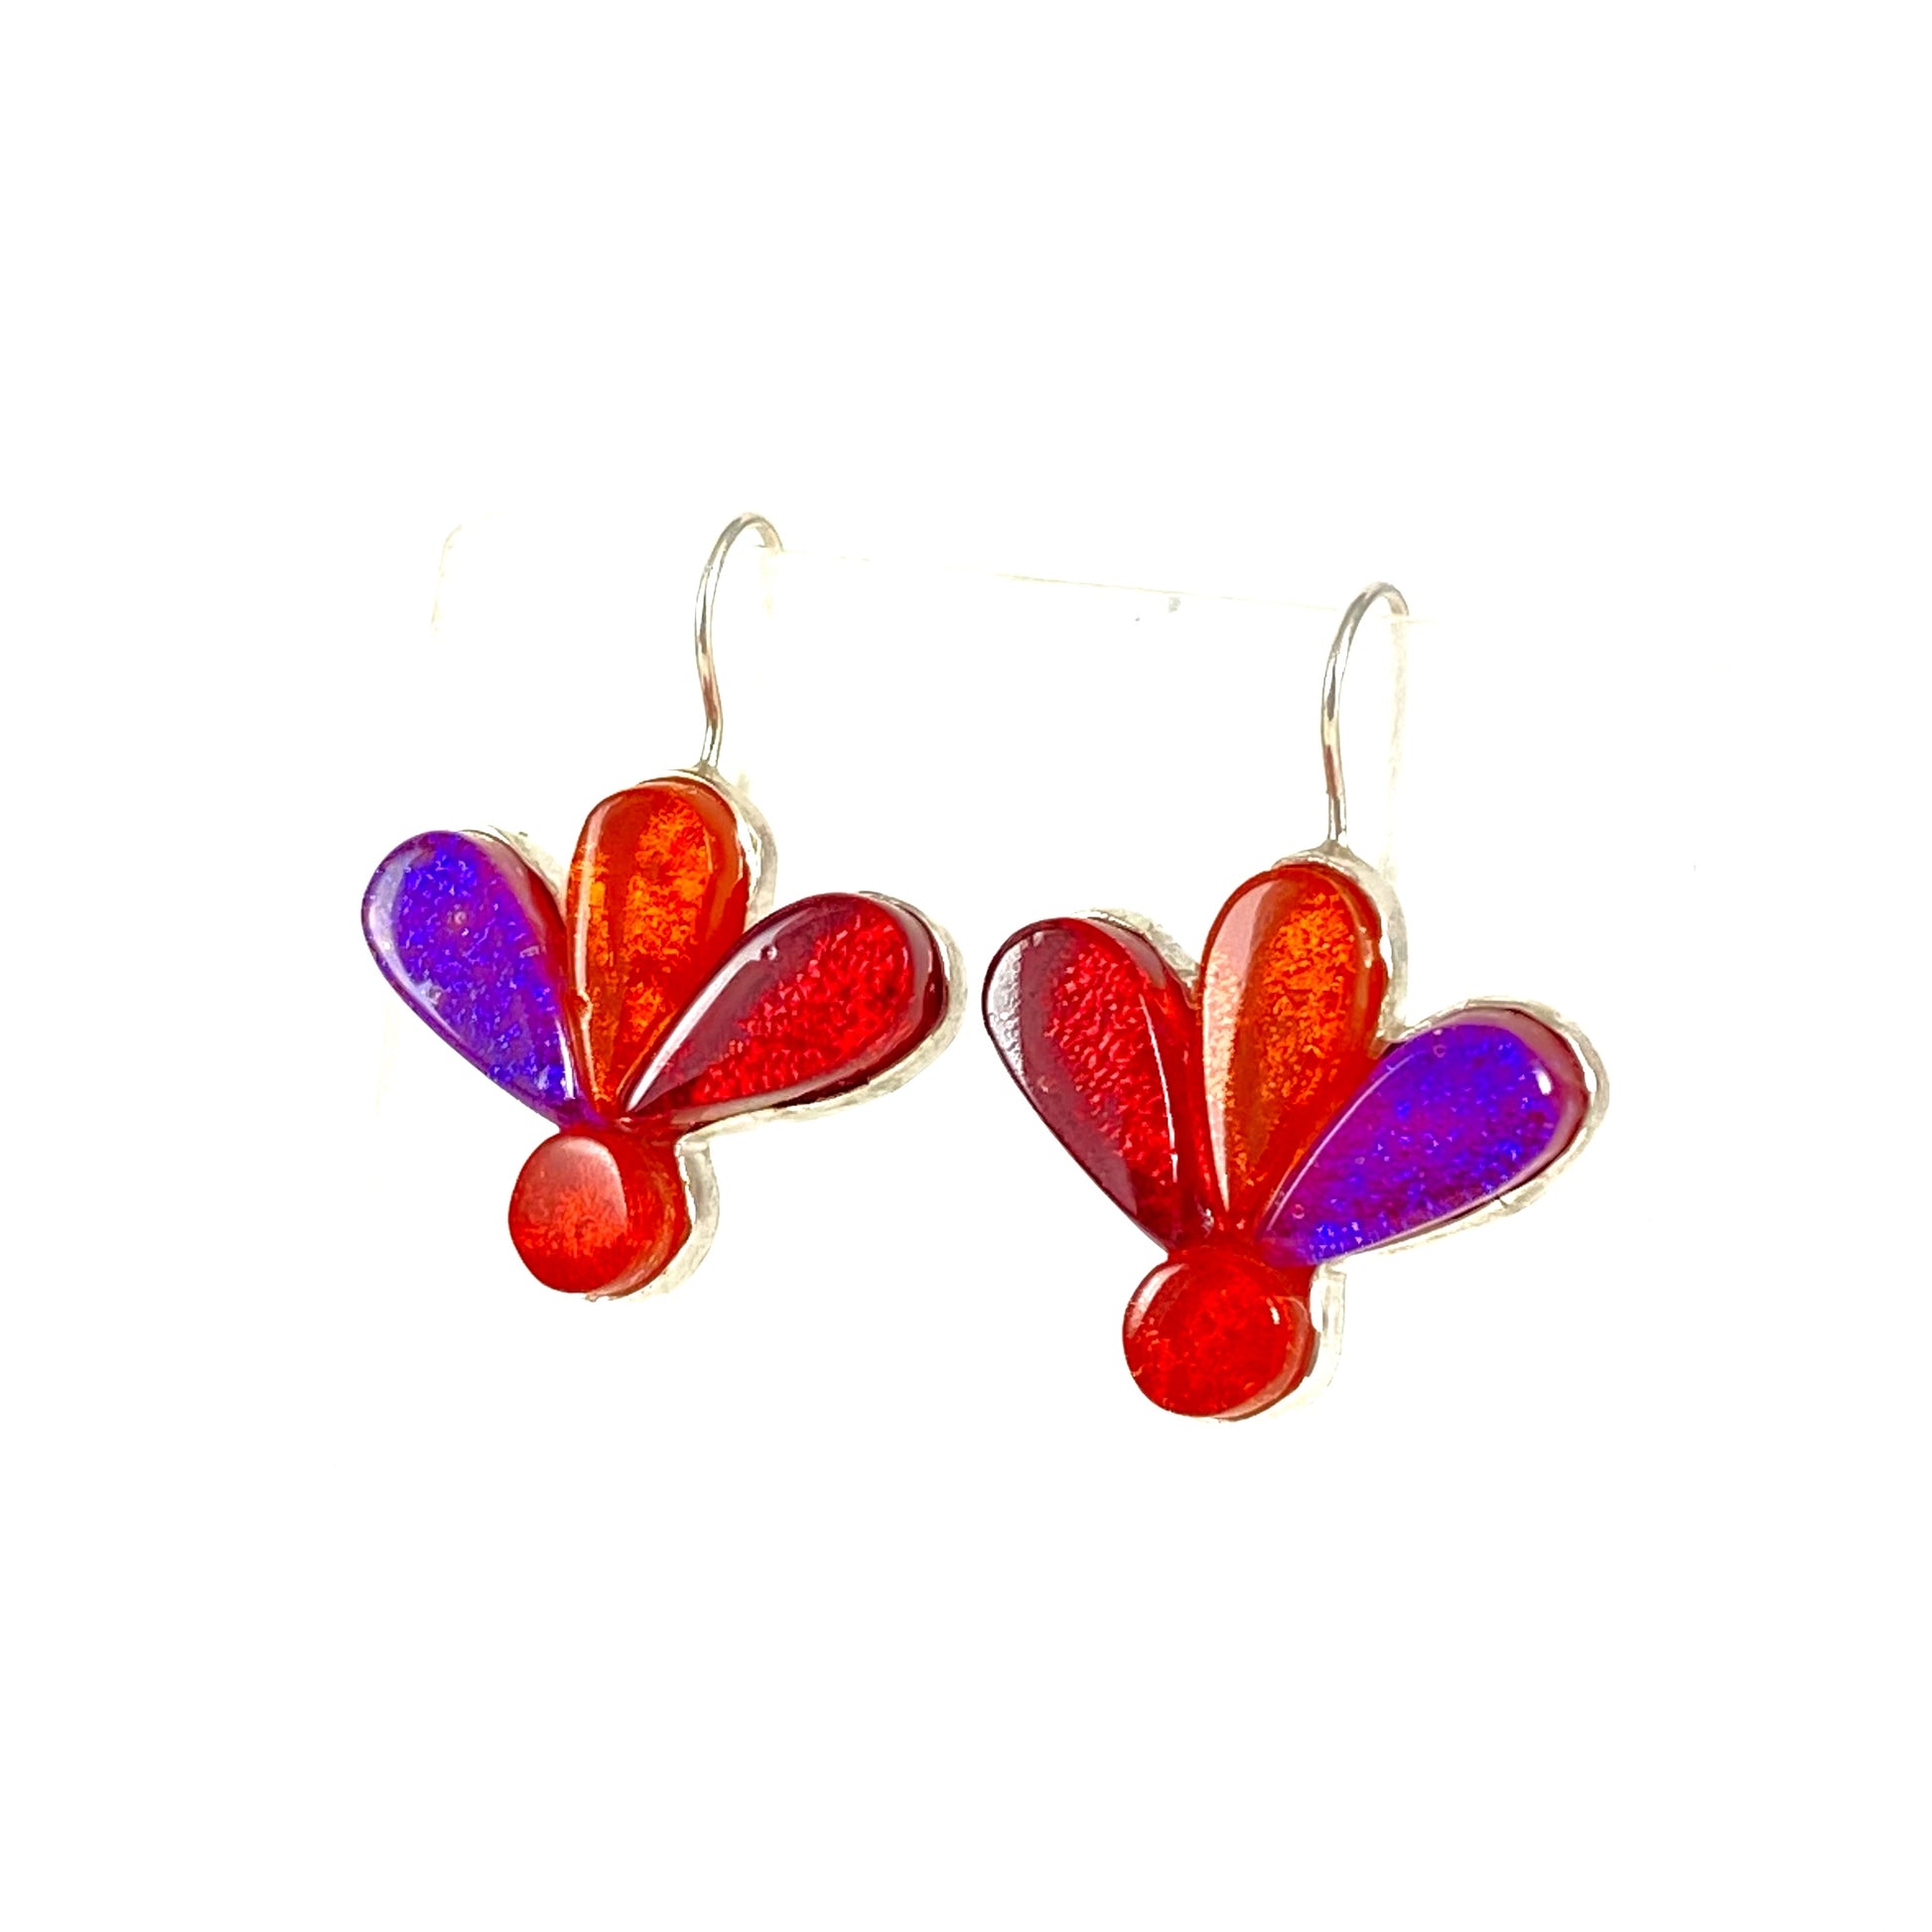 blossom flower earrings, orange, red, pink, fused glass, glass jewelry, glass and silver jewelry, handmade, handcrafted, American Craft, hand fabricated jewelry, hand fabricated jewellery, Athen, Georgia, colorful jewelry, sparkle, bullseye glass, dichroic glass, art jewelry